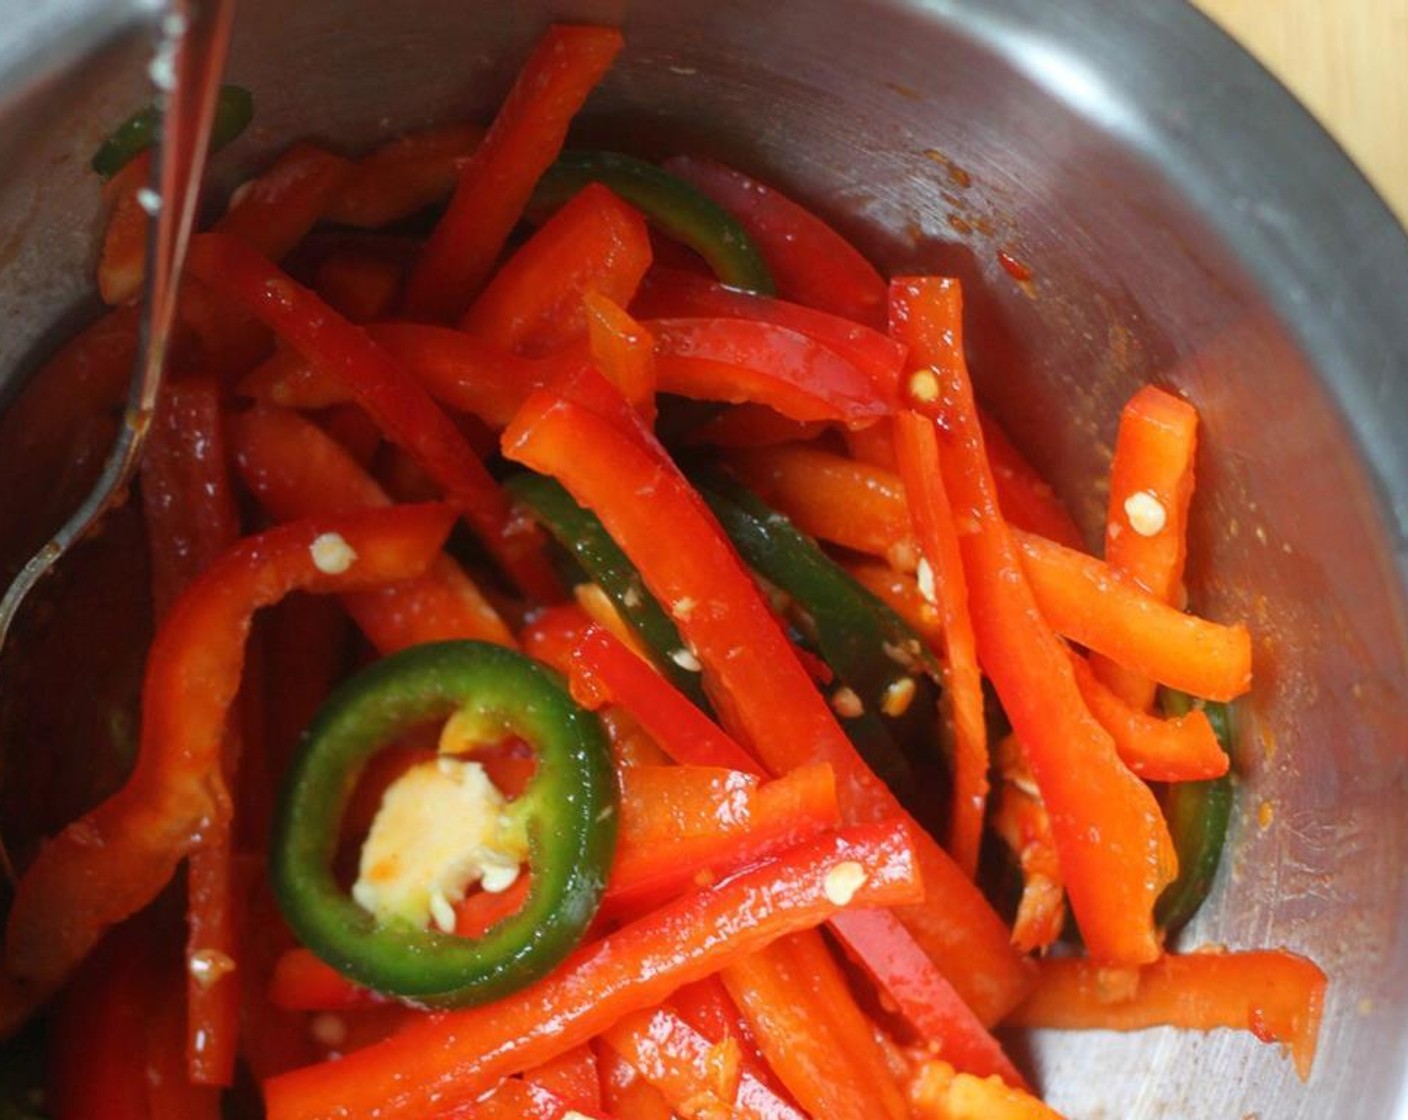 step 4 Toss the Red Bell Pepper (1) and Jalapeño Pepper (1) together with a little sauce as well.